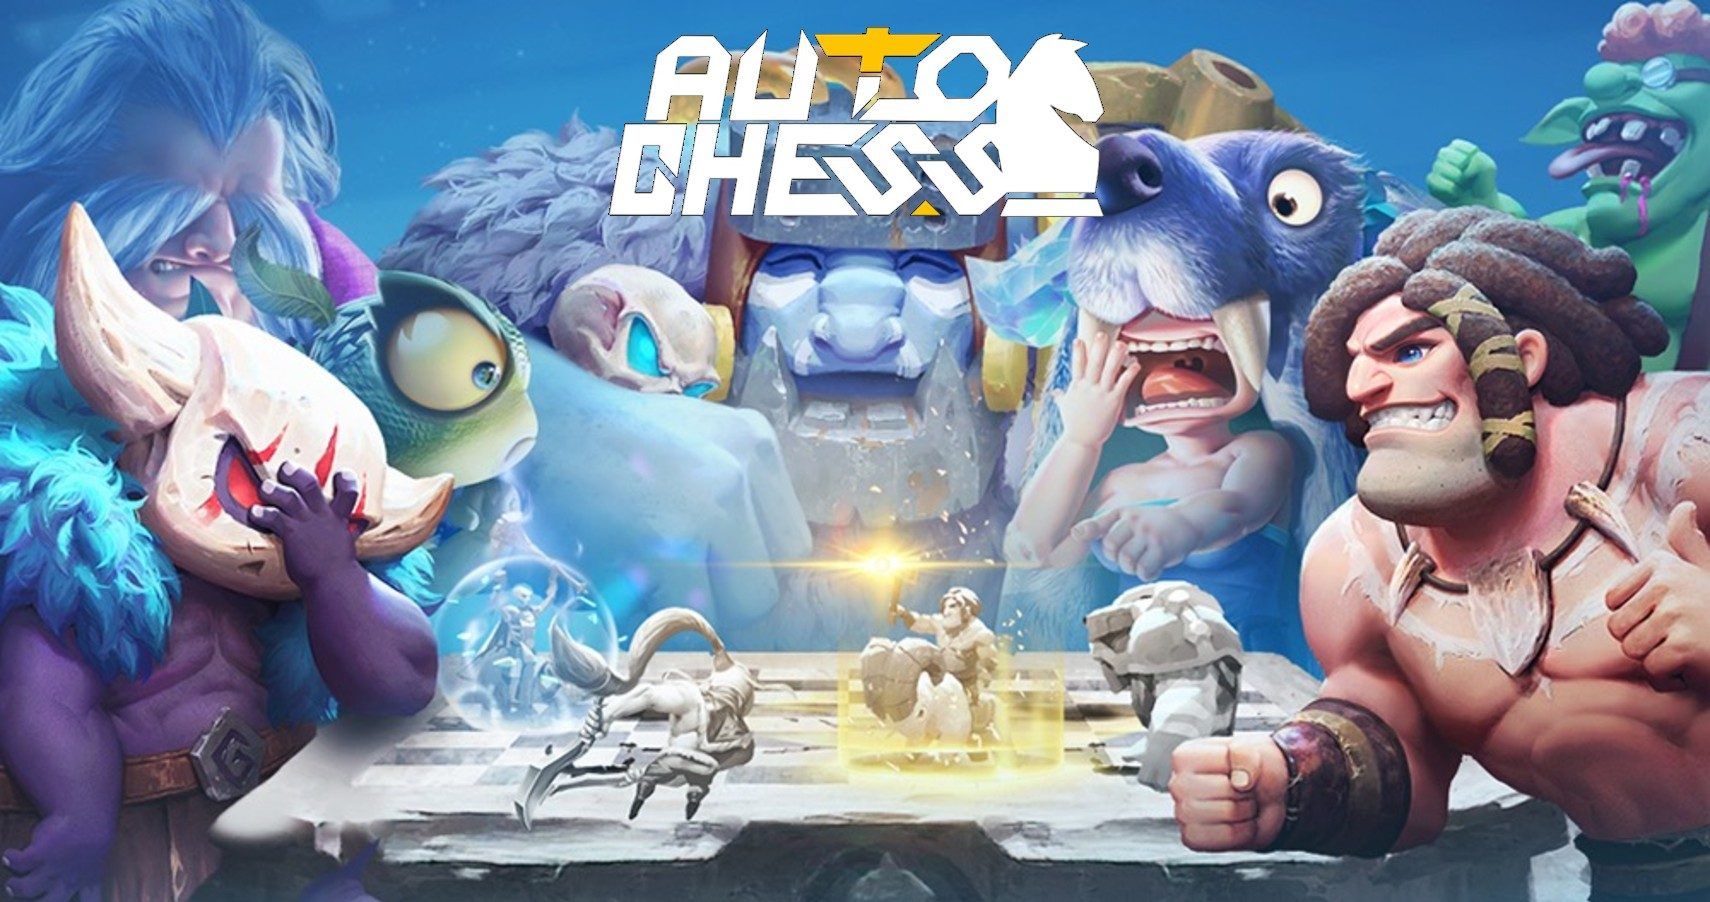 Auto Chess will be available on PlayStation